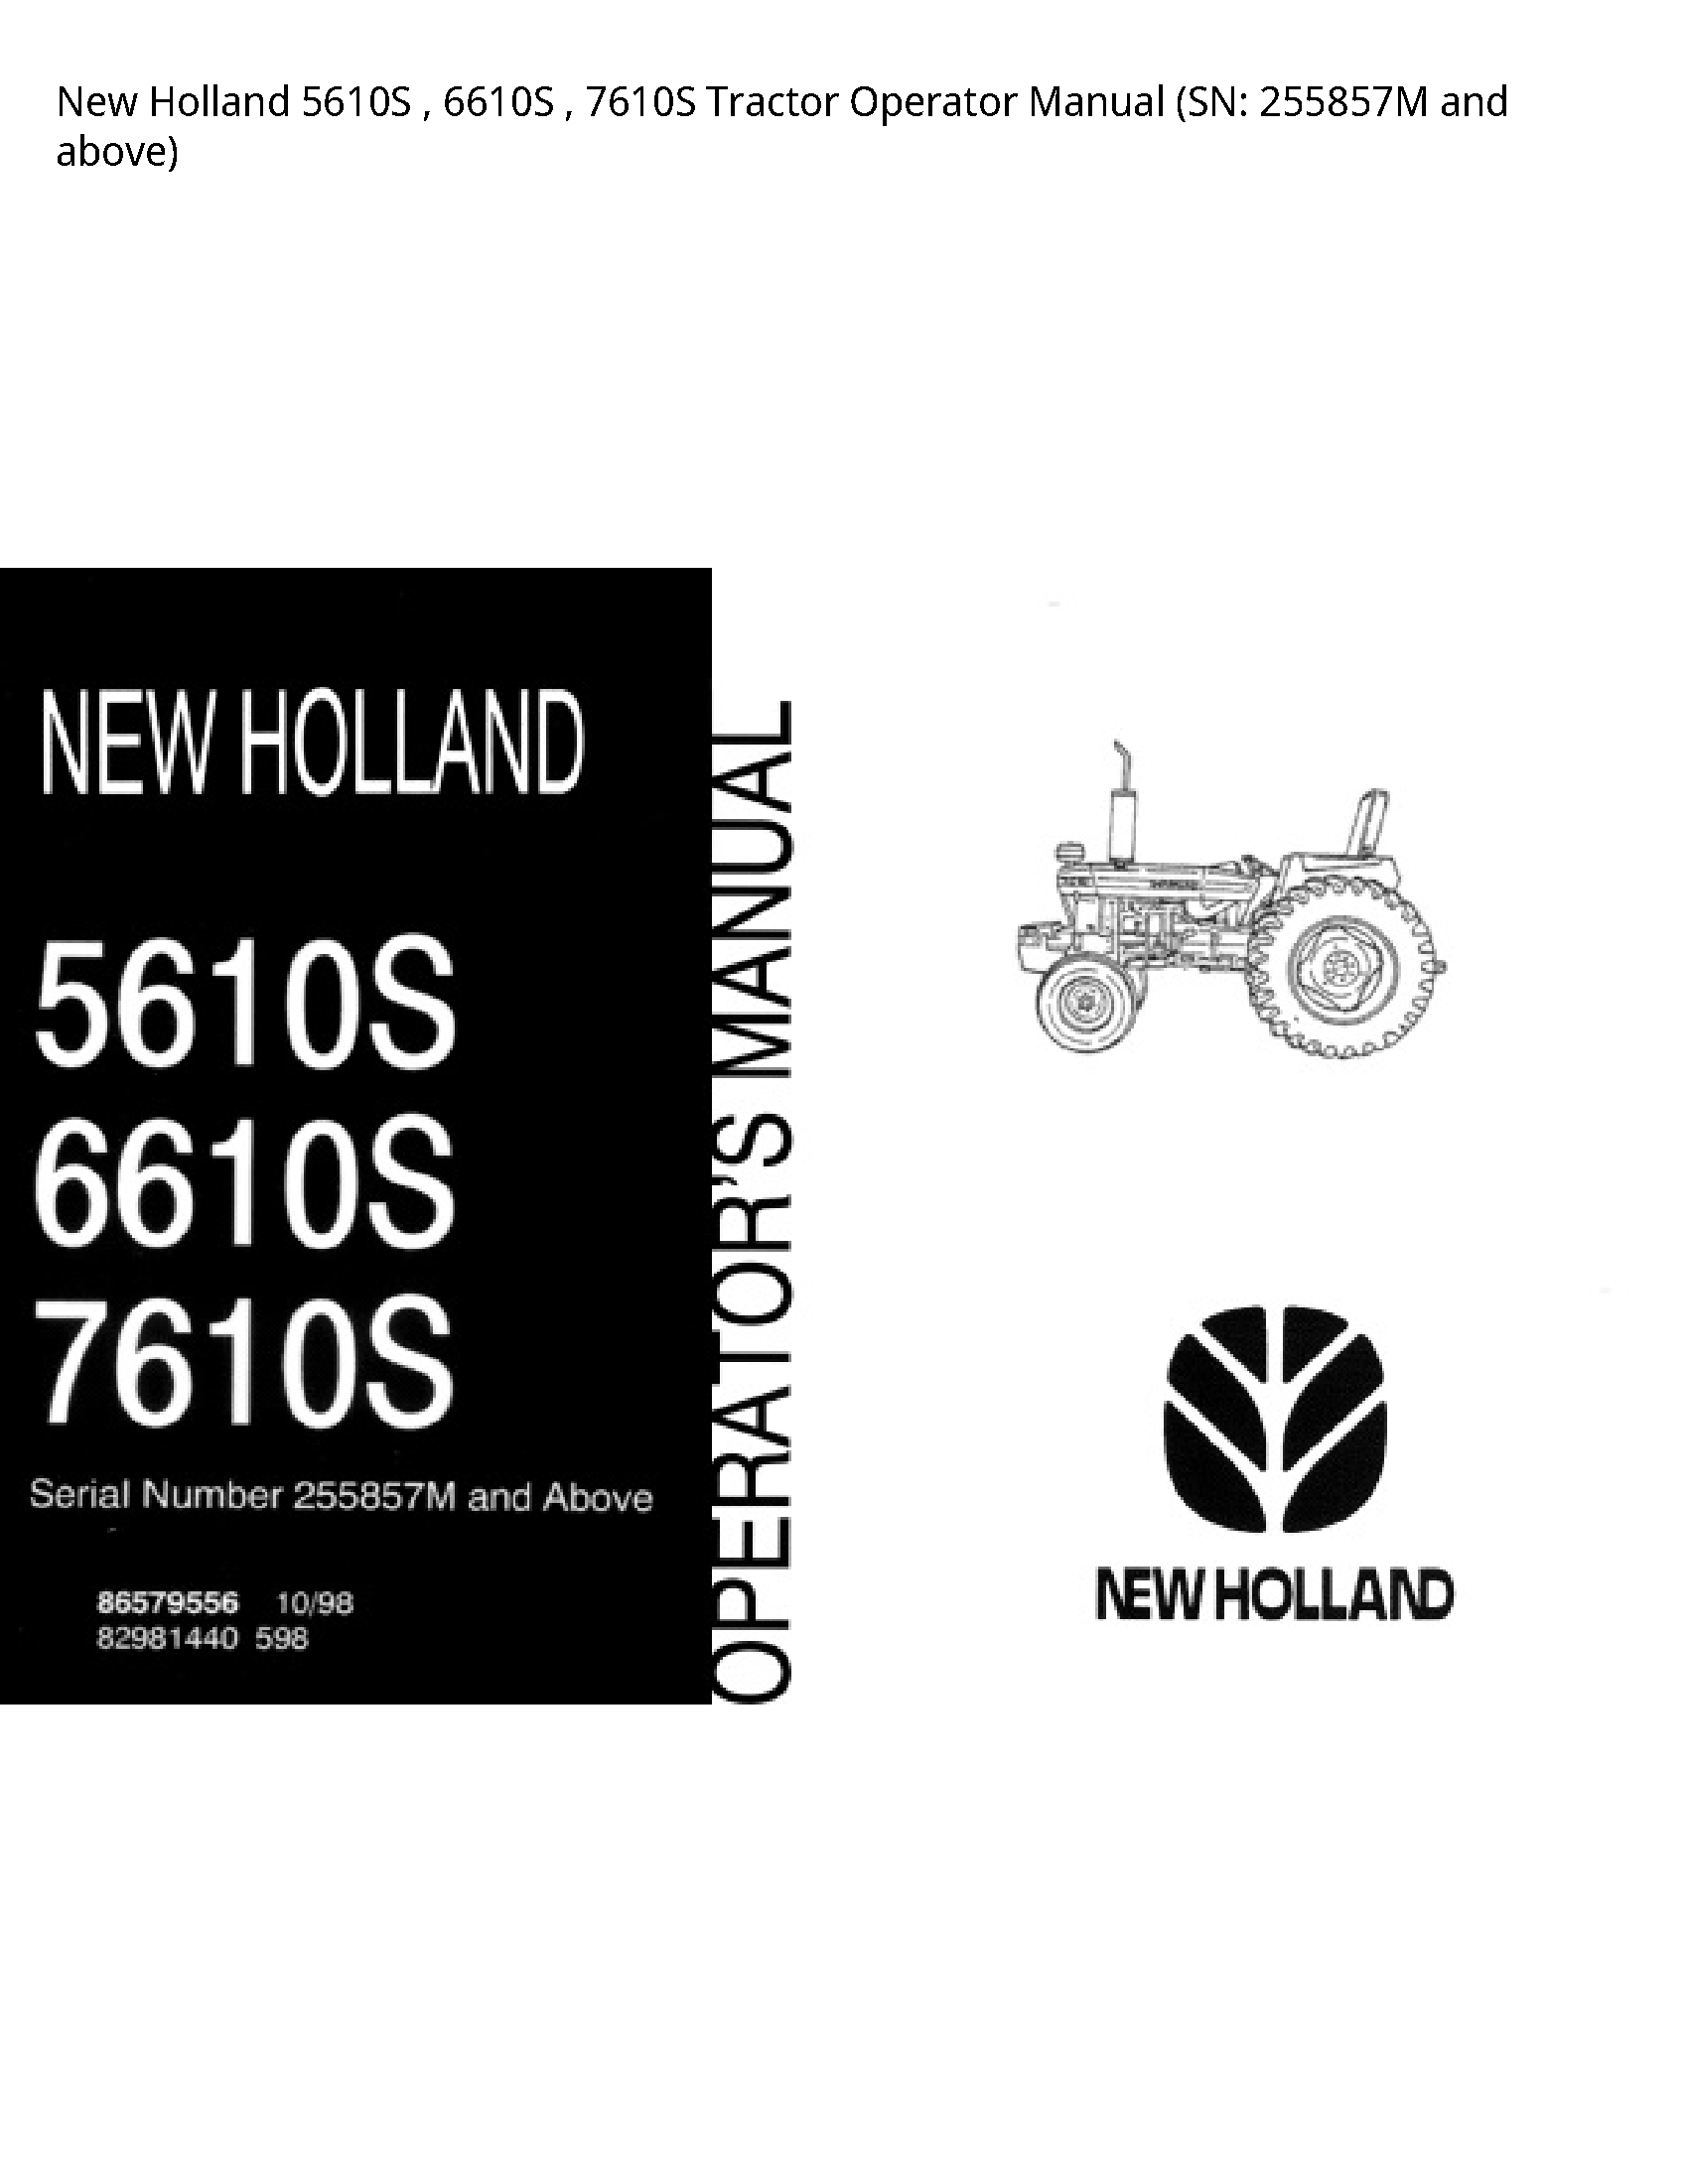 New Holland 5610S Tractor Operator manual